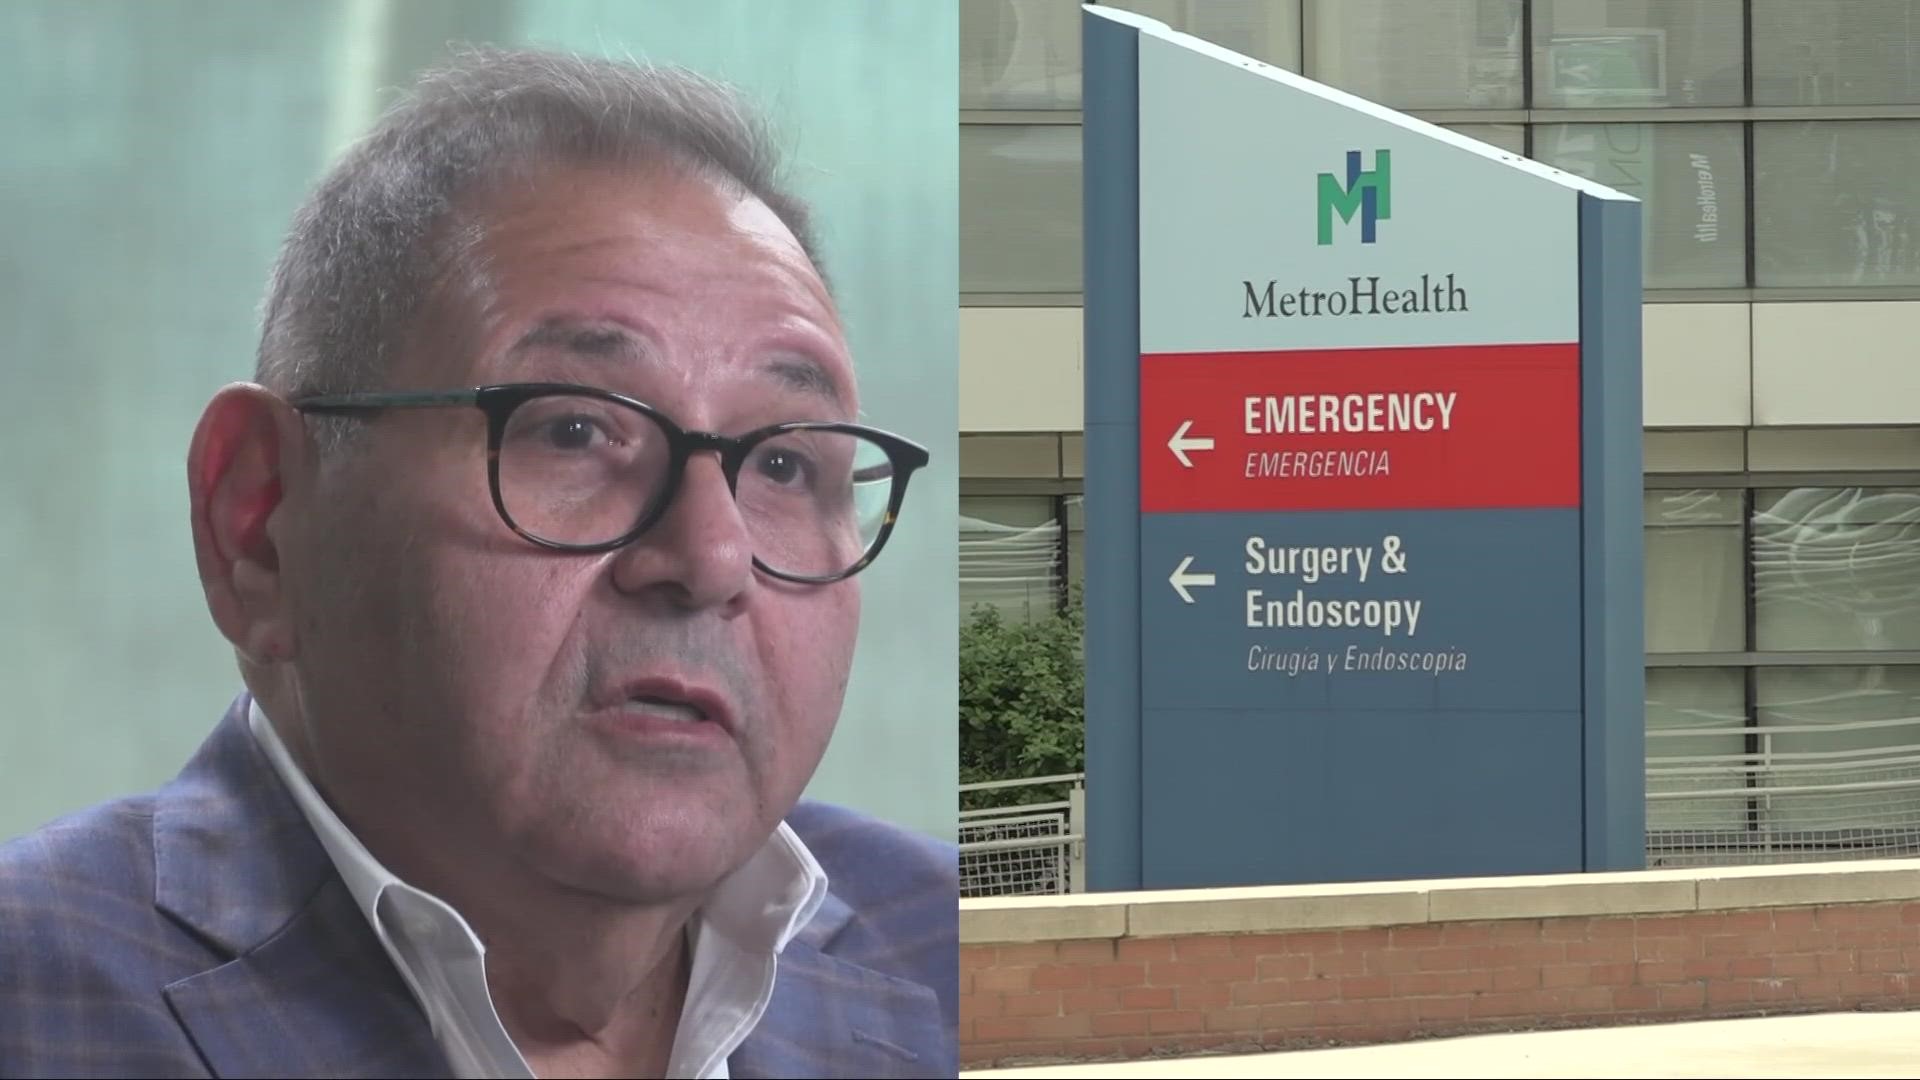 MetroHealth filed a response to one of the two lawsuits that Boutros has filed after the health system terminated him in November.